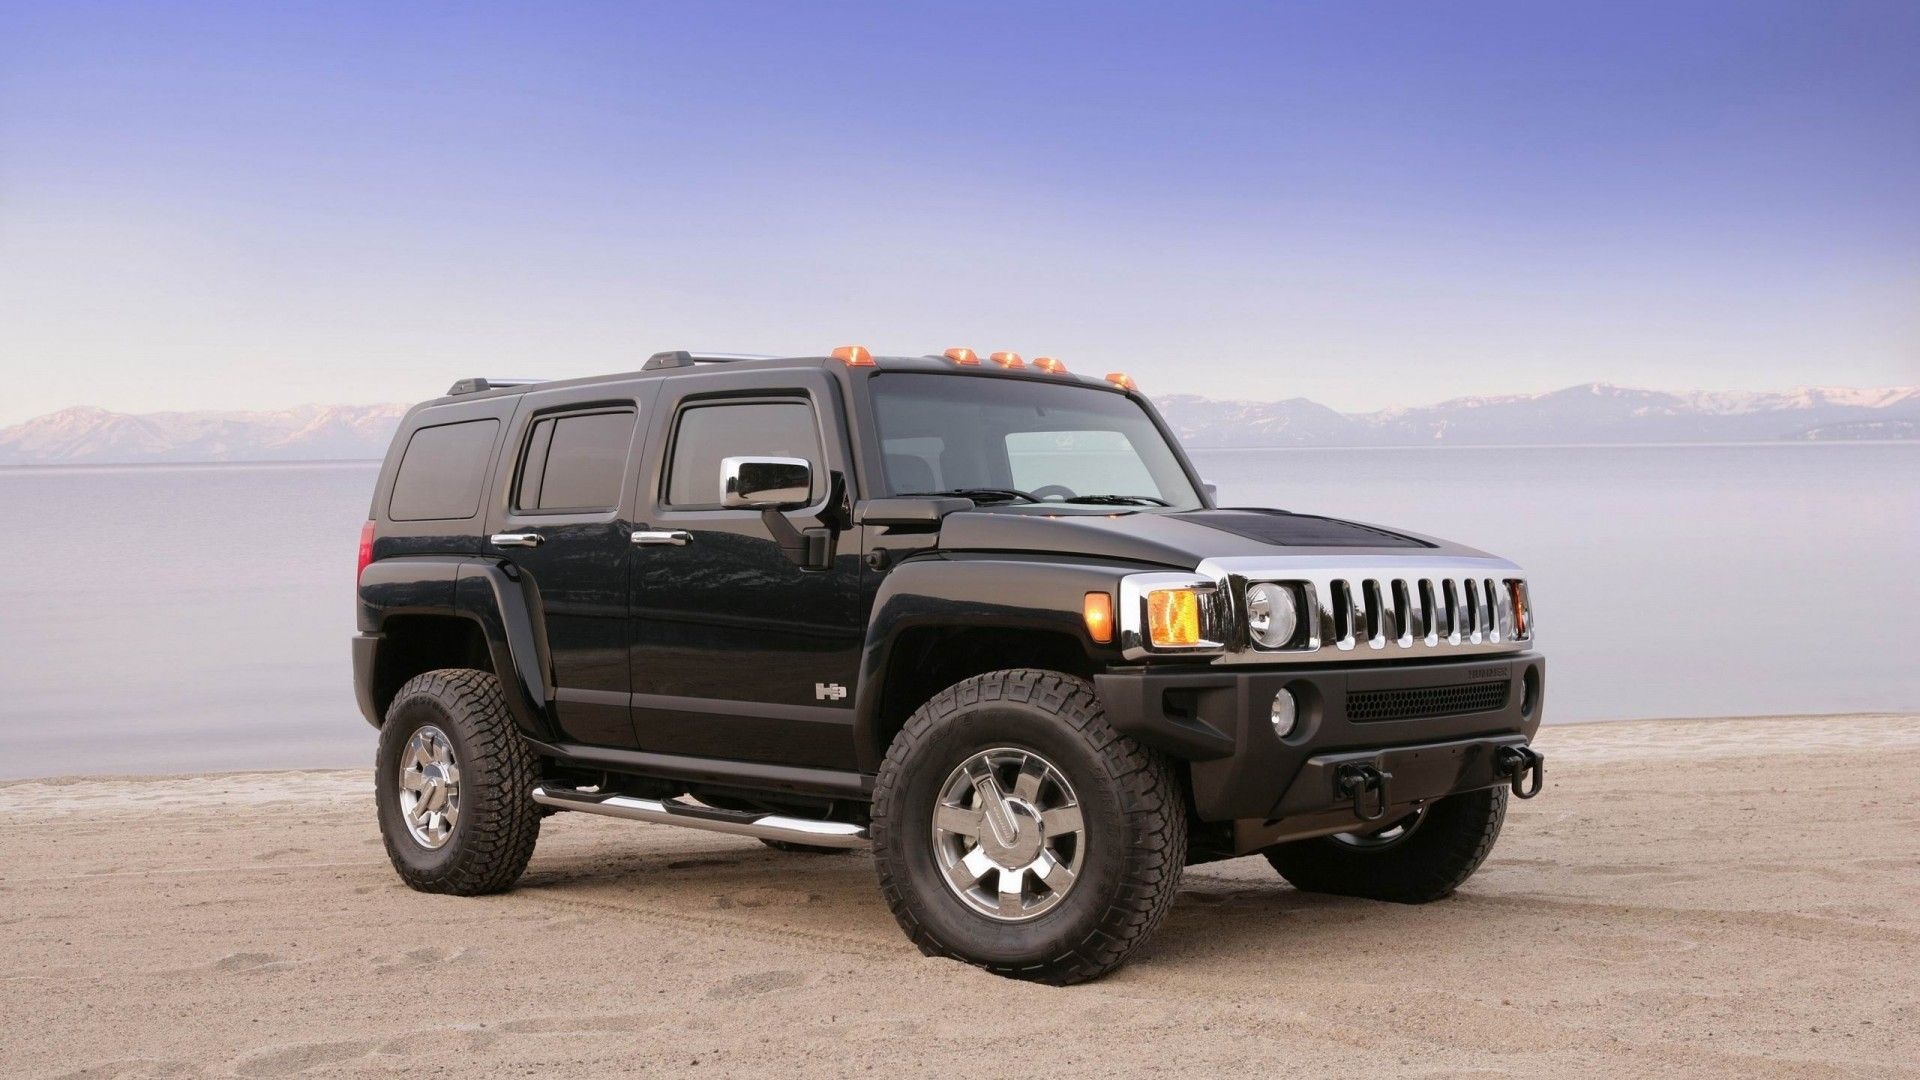 Hummer H3, Hummer H3 wallpapers, Powerful Hummer H3 images, Rugged and sturdy Hummer, 1920x1080 Full HD Desktop